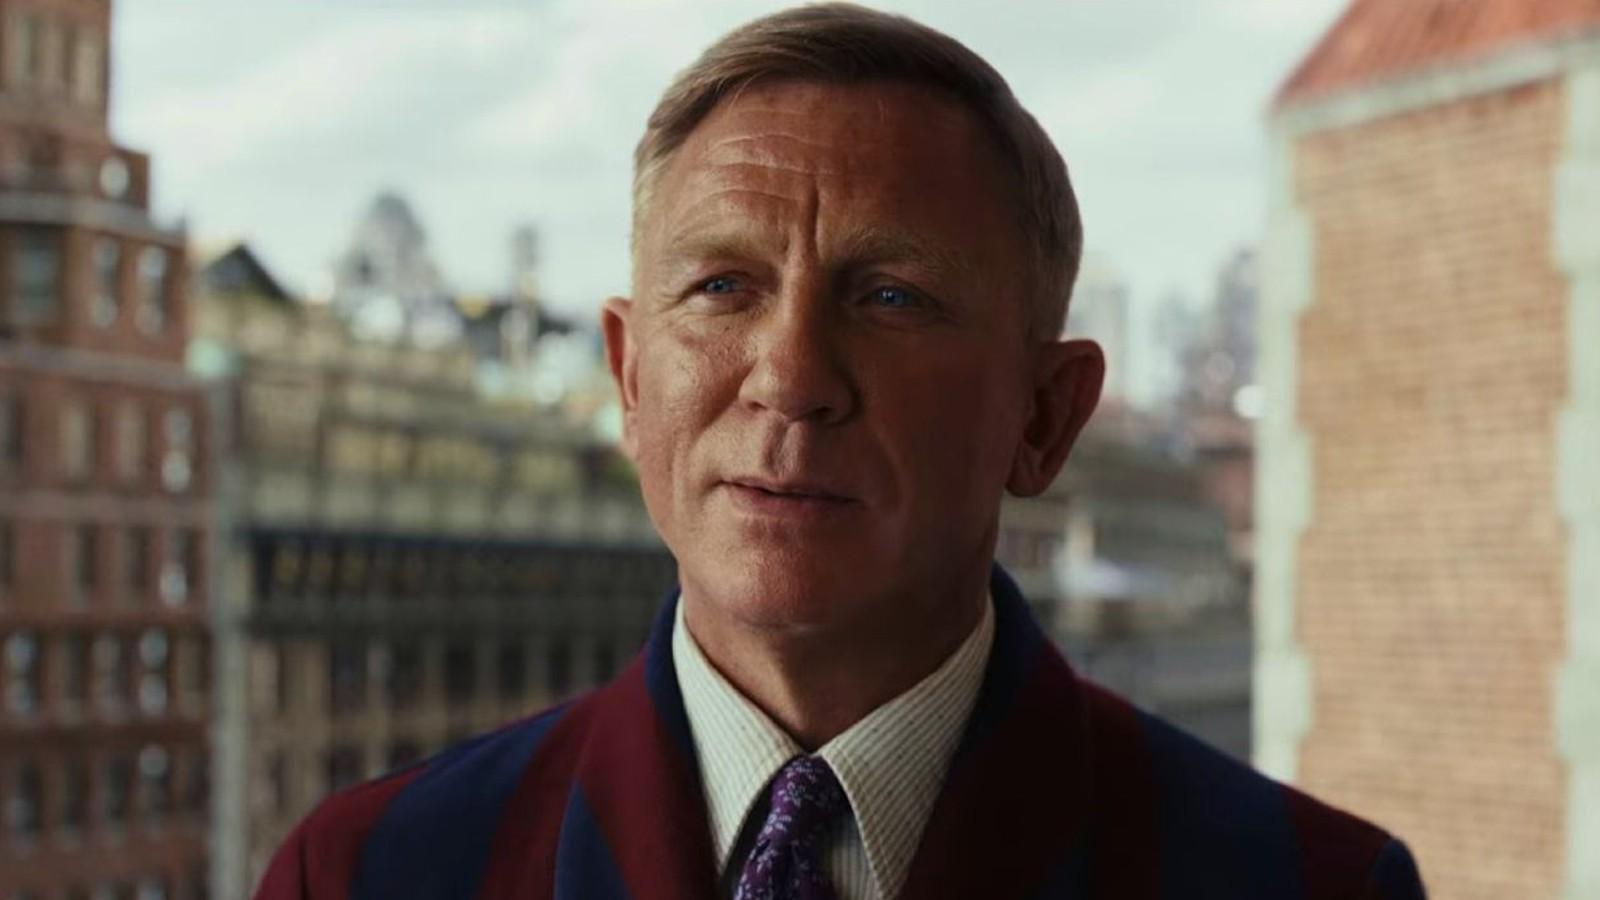 Daniel Craig as Benoit Blanc who is expected to return for Knives Out 3